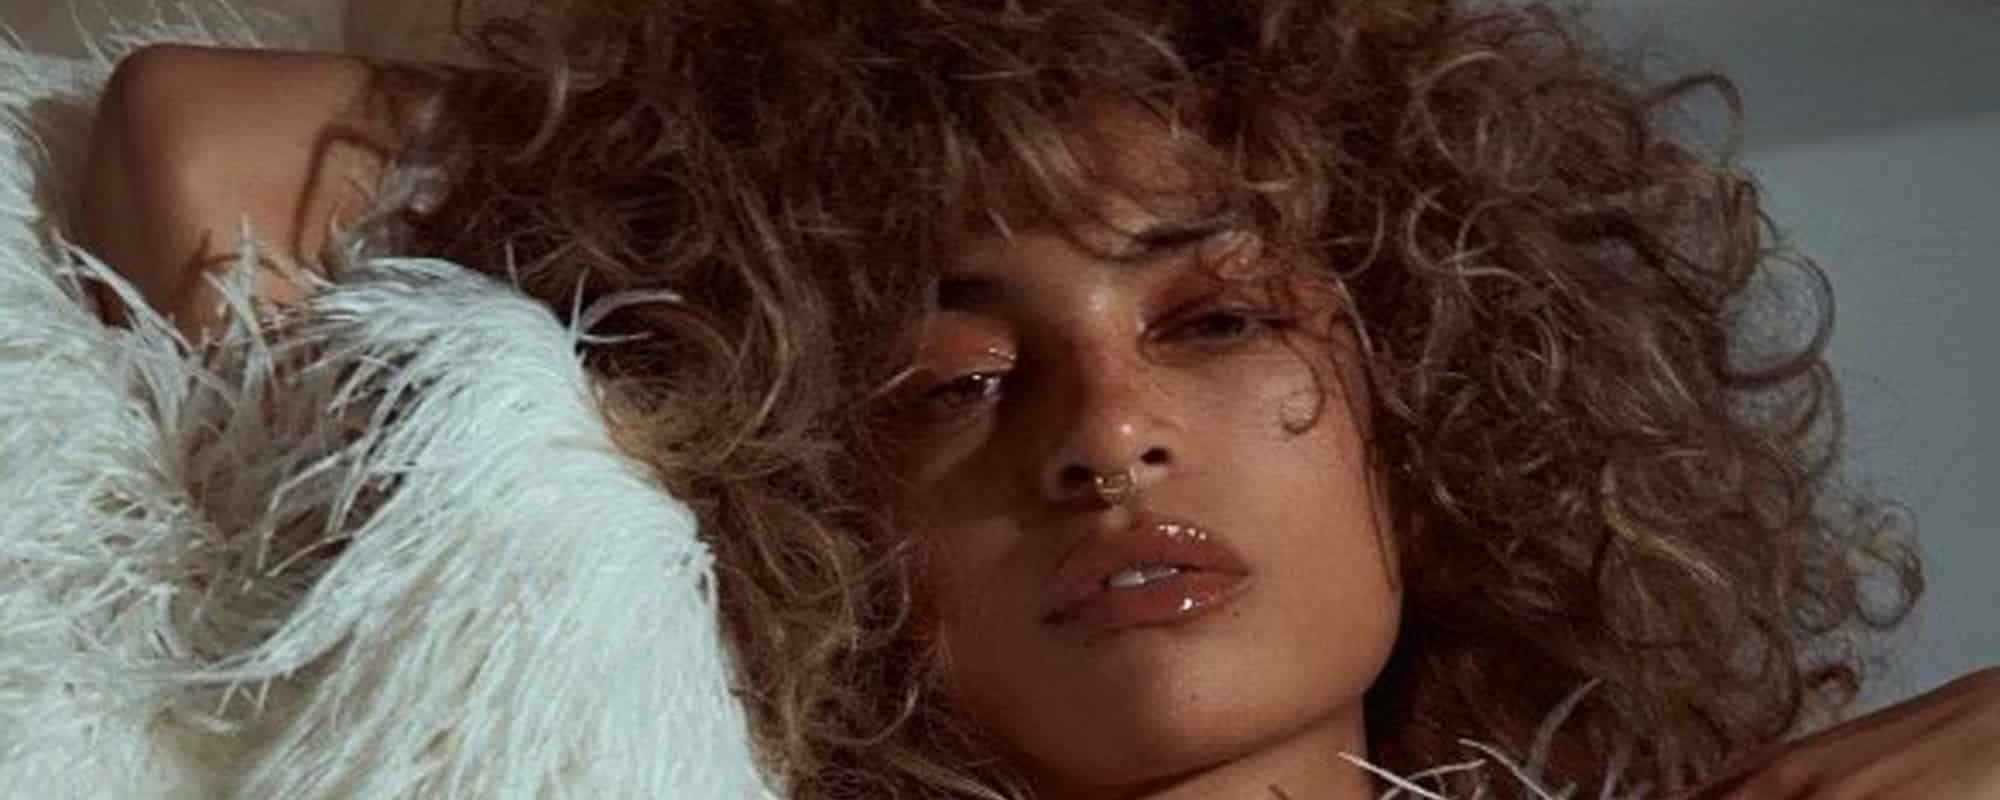 Singer/Songwriter QUIÑ Carves Her Own Path with New Single, “Crush”